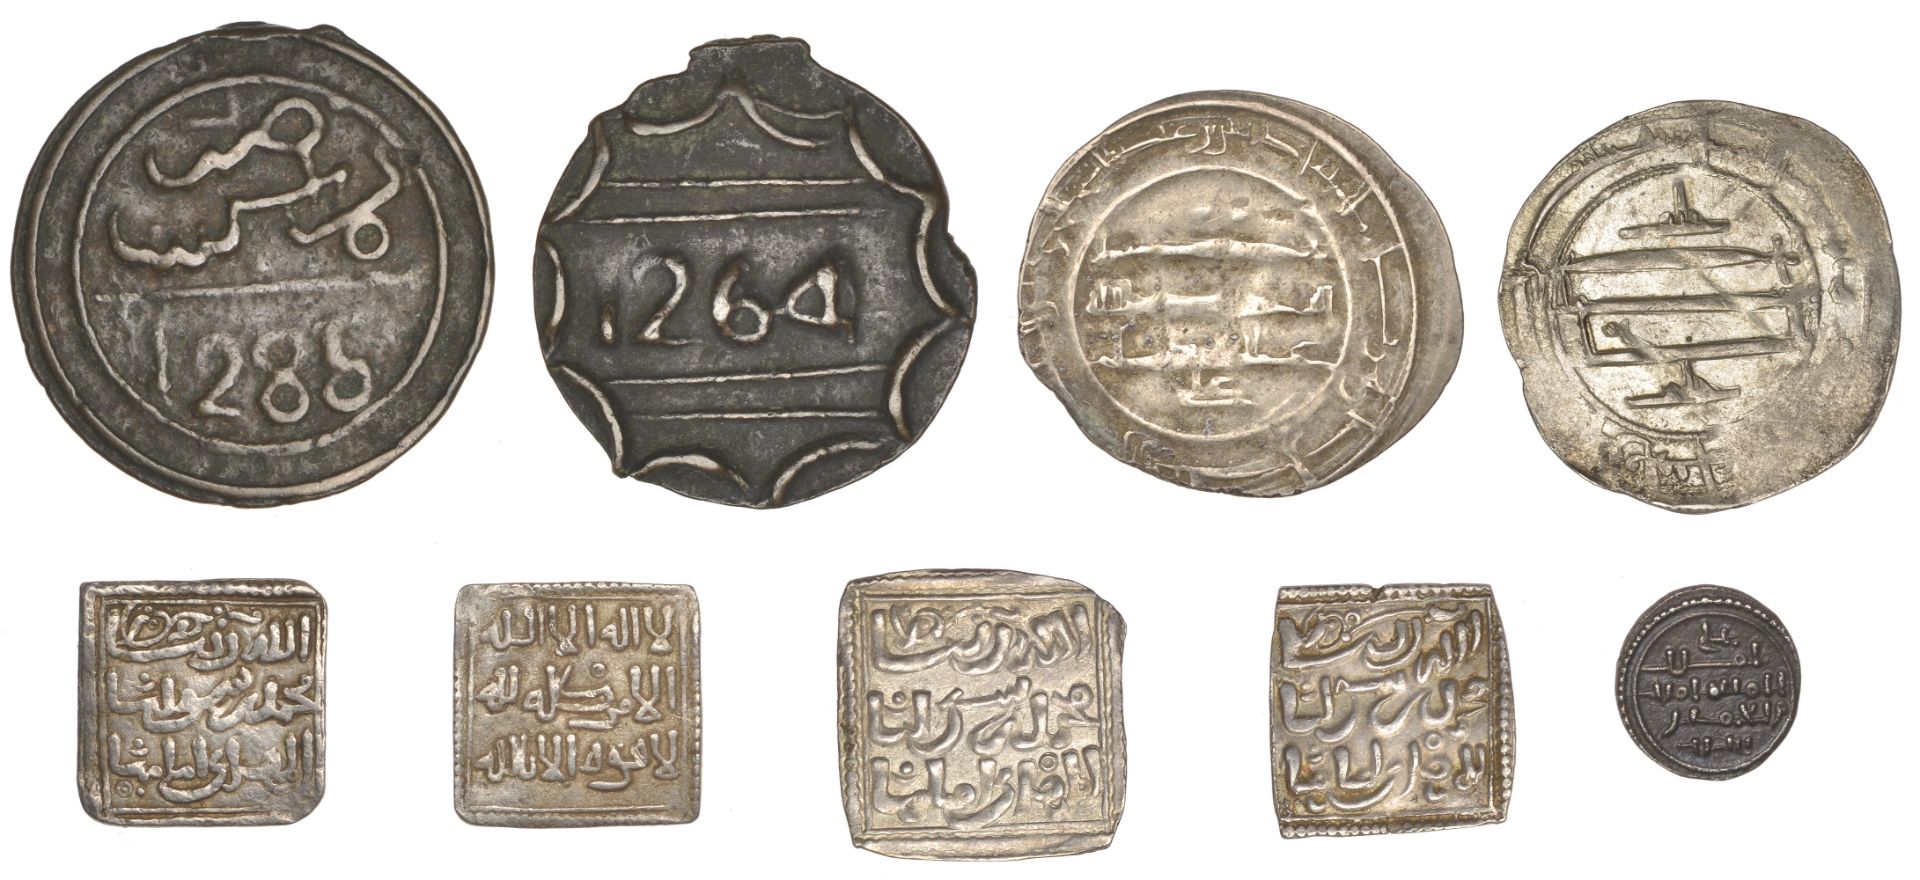 The Hon. Robert Erskine Collection, Part I: Early Persian, Islamic and Crusader Coins - Image 2 of 2